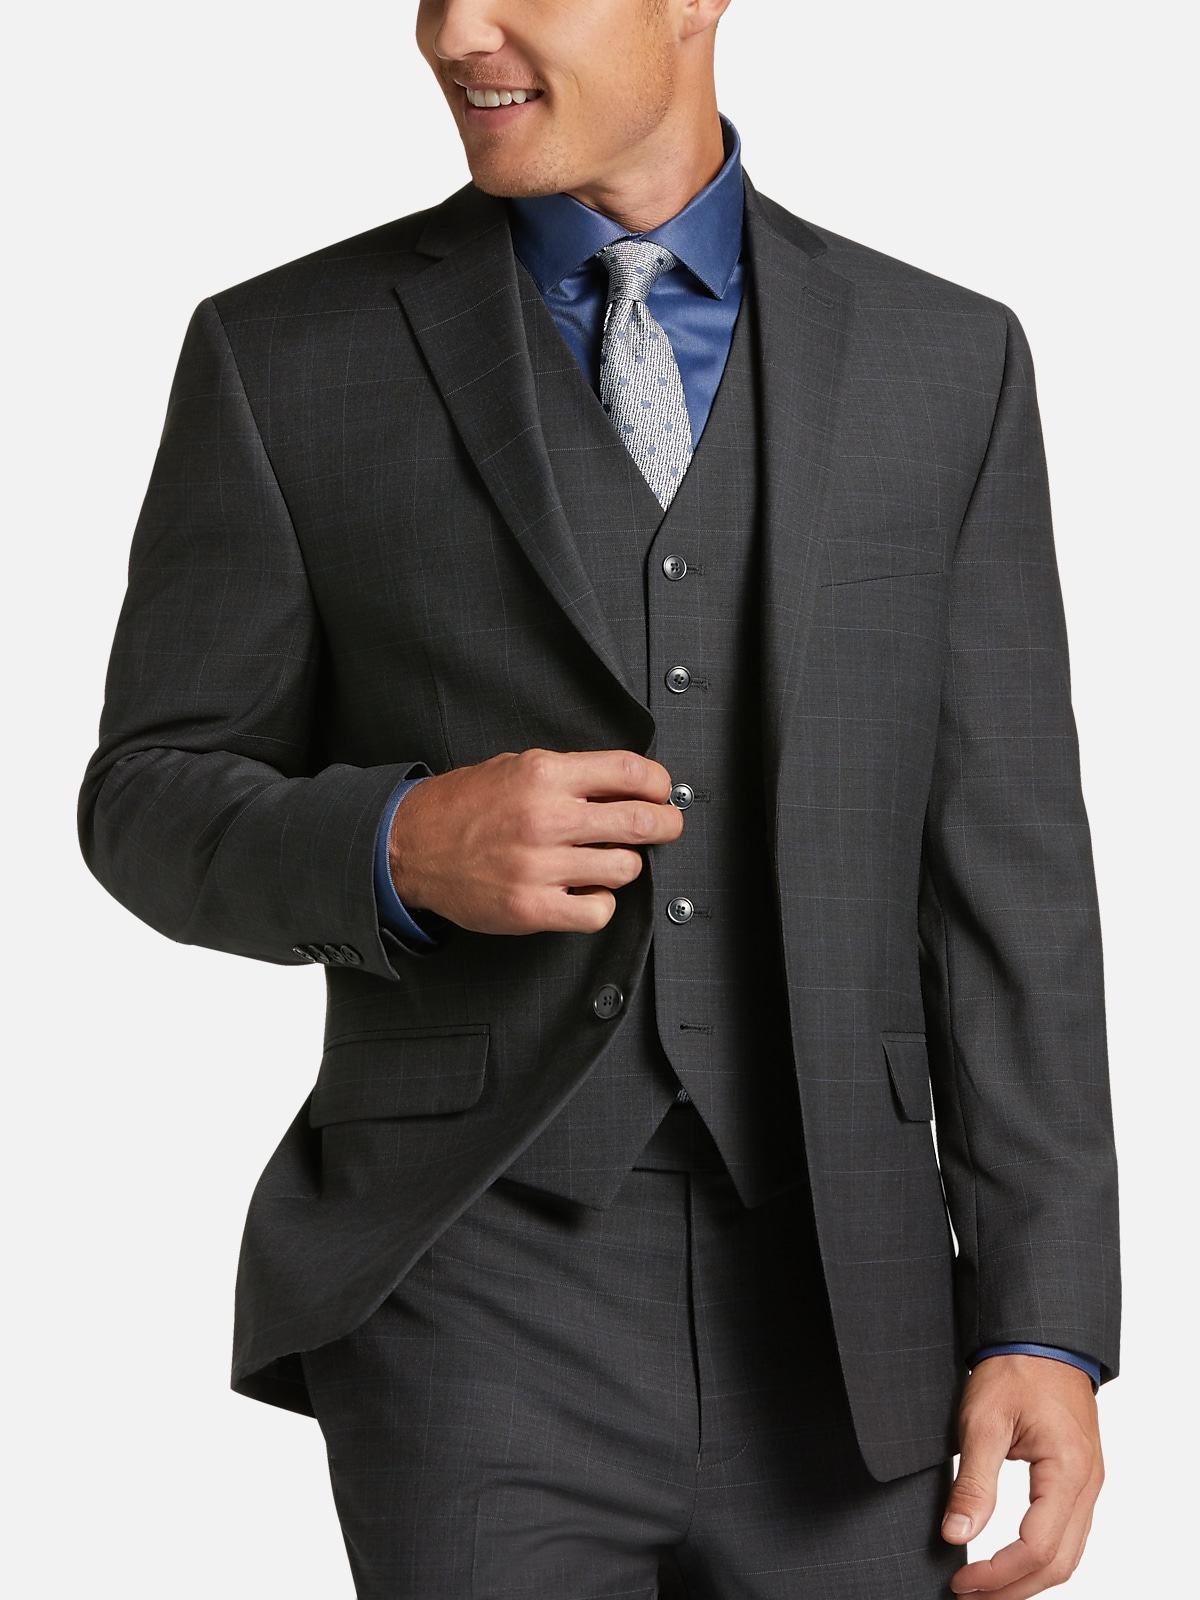 Michael Strahan Classic Fit Vested Suit All Clearance 3999 Mens Wearhouse 